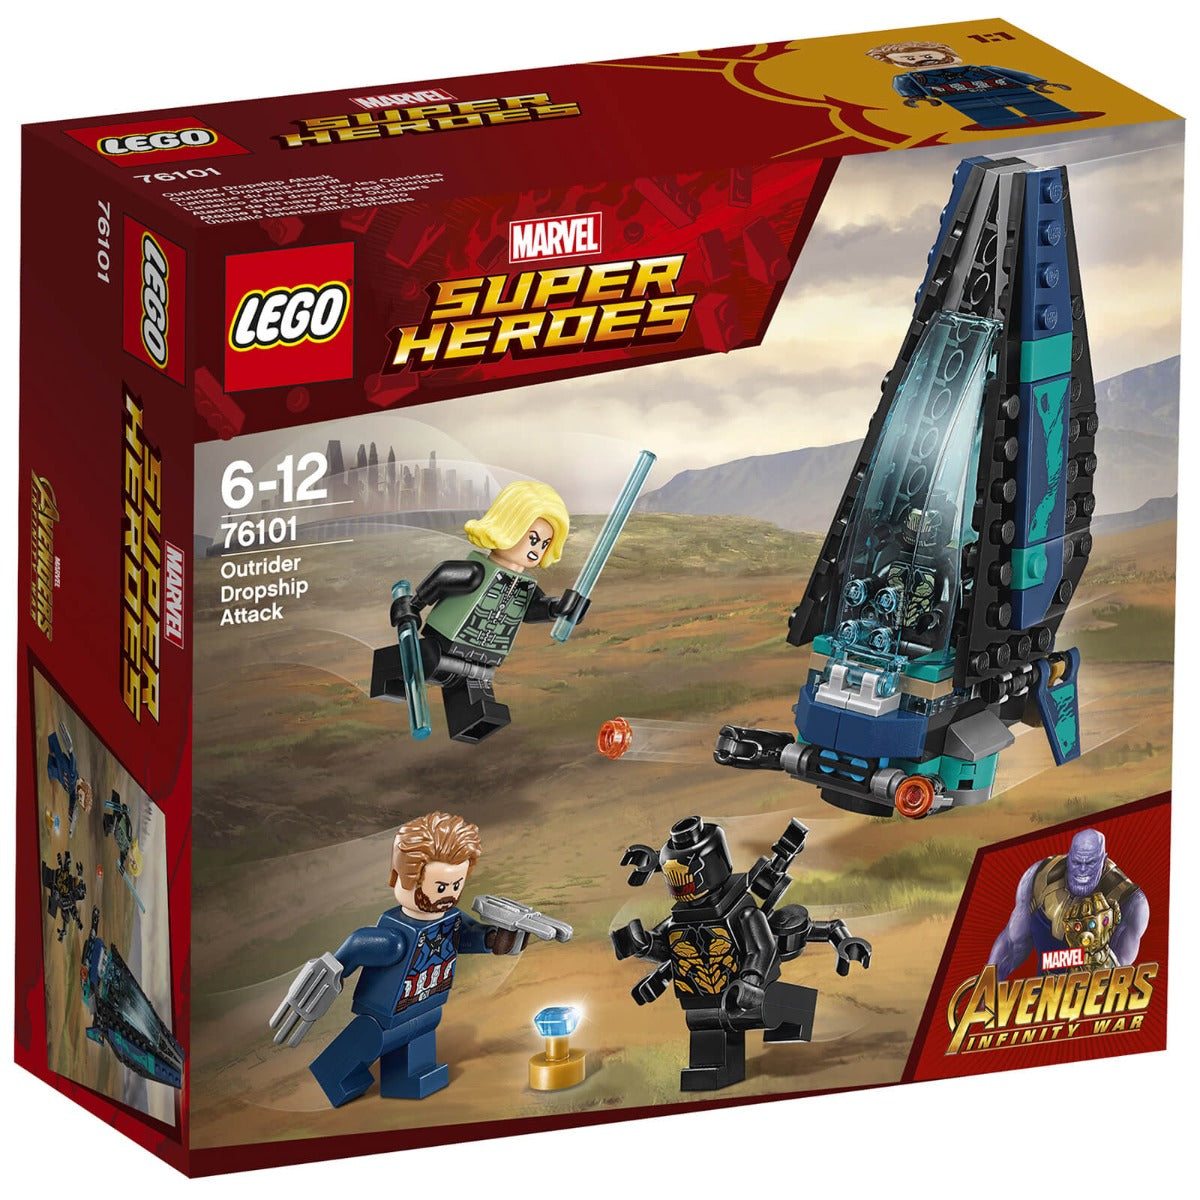 Lego Superheroes Avengers Outrider Dropship Attack 76101